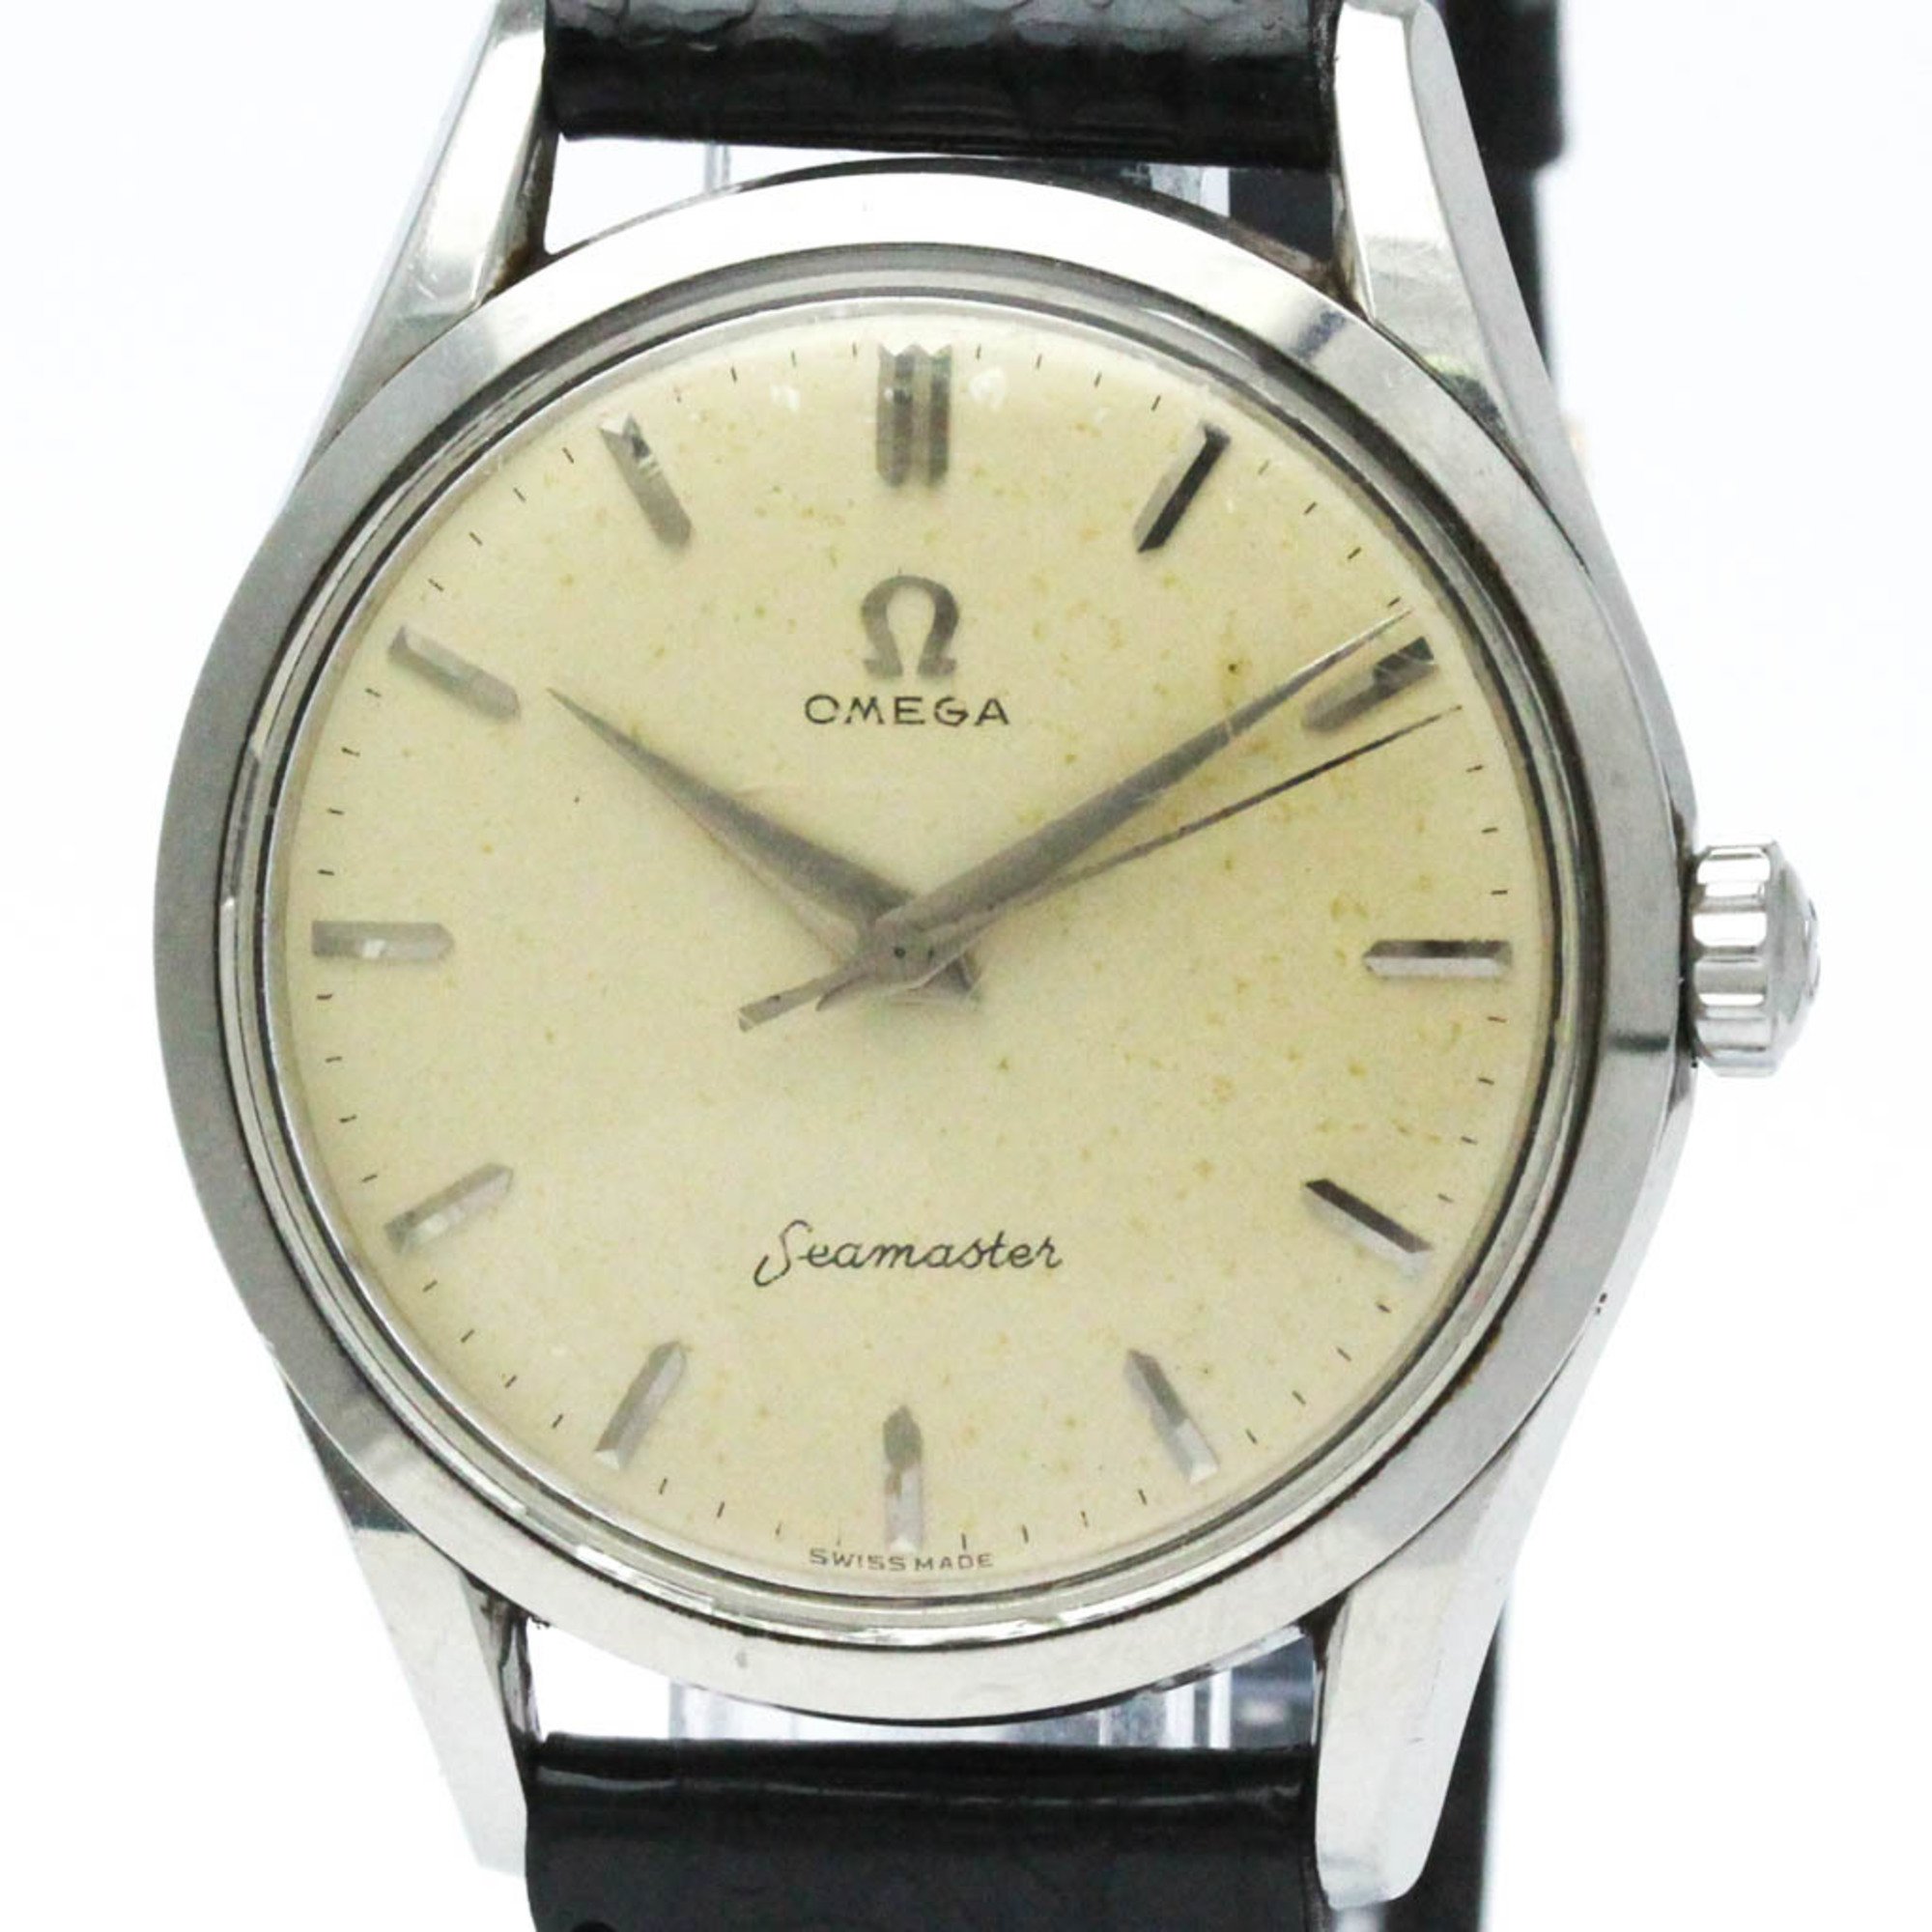 Vintage OMEGA Seamaster Cal.284 Steel Hand-Winding Mens Watch 2938 BF571724